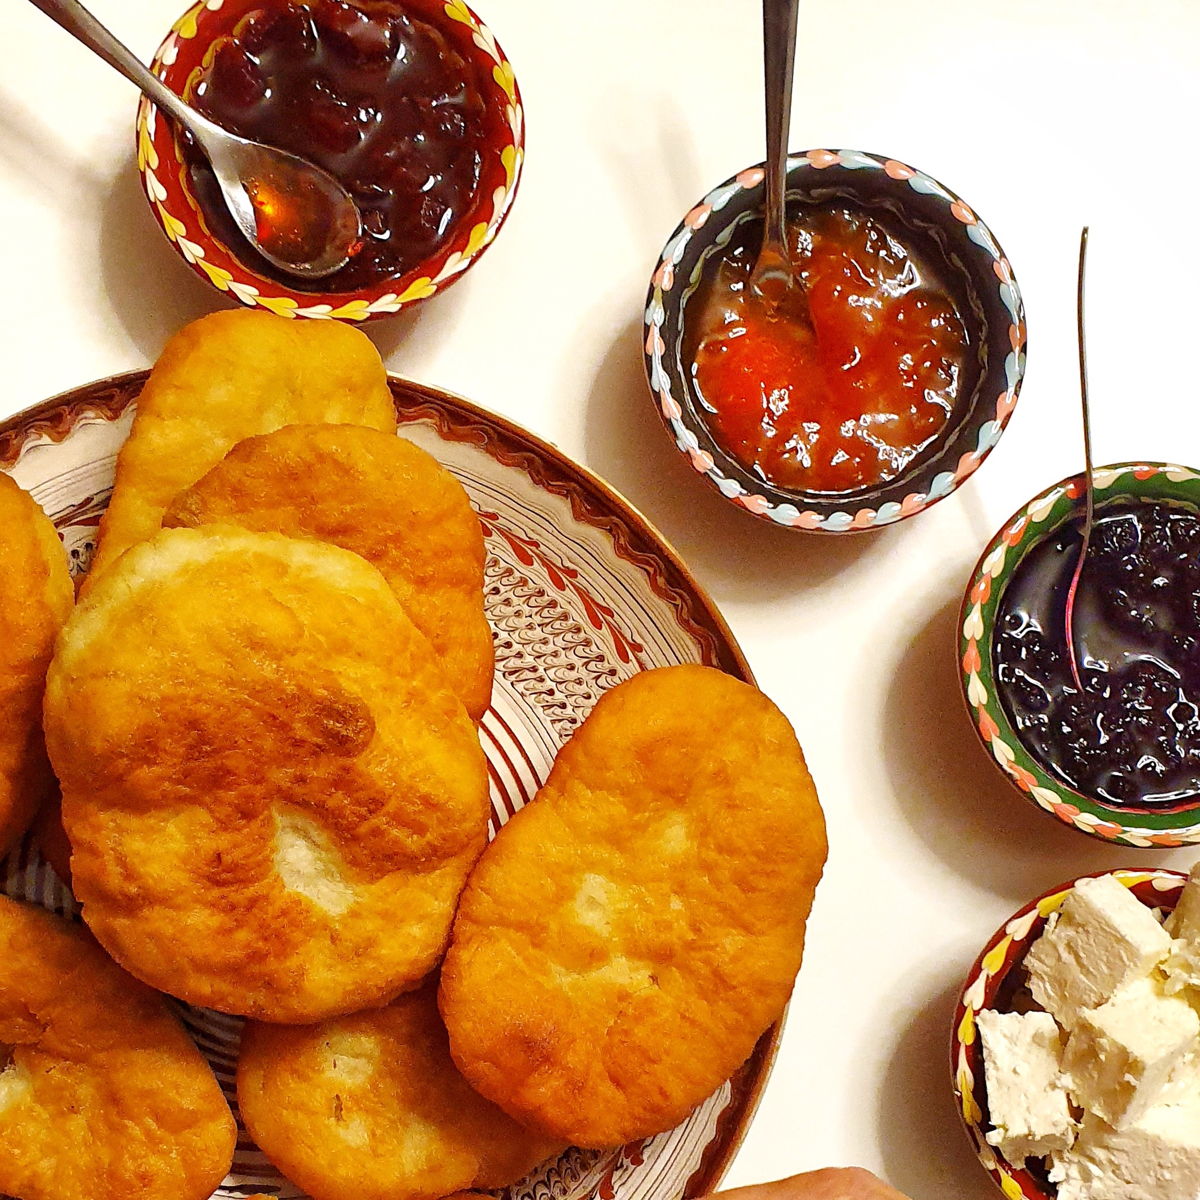 Traditional Romanian fried dough served with local cheeses and homemade jams.